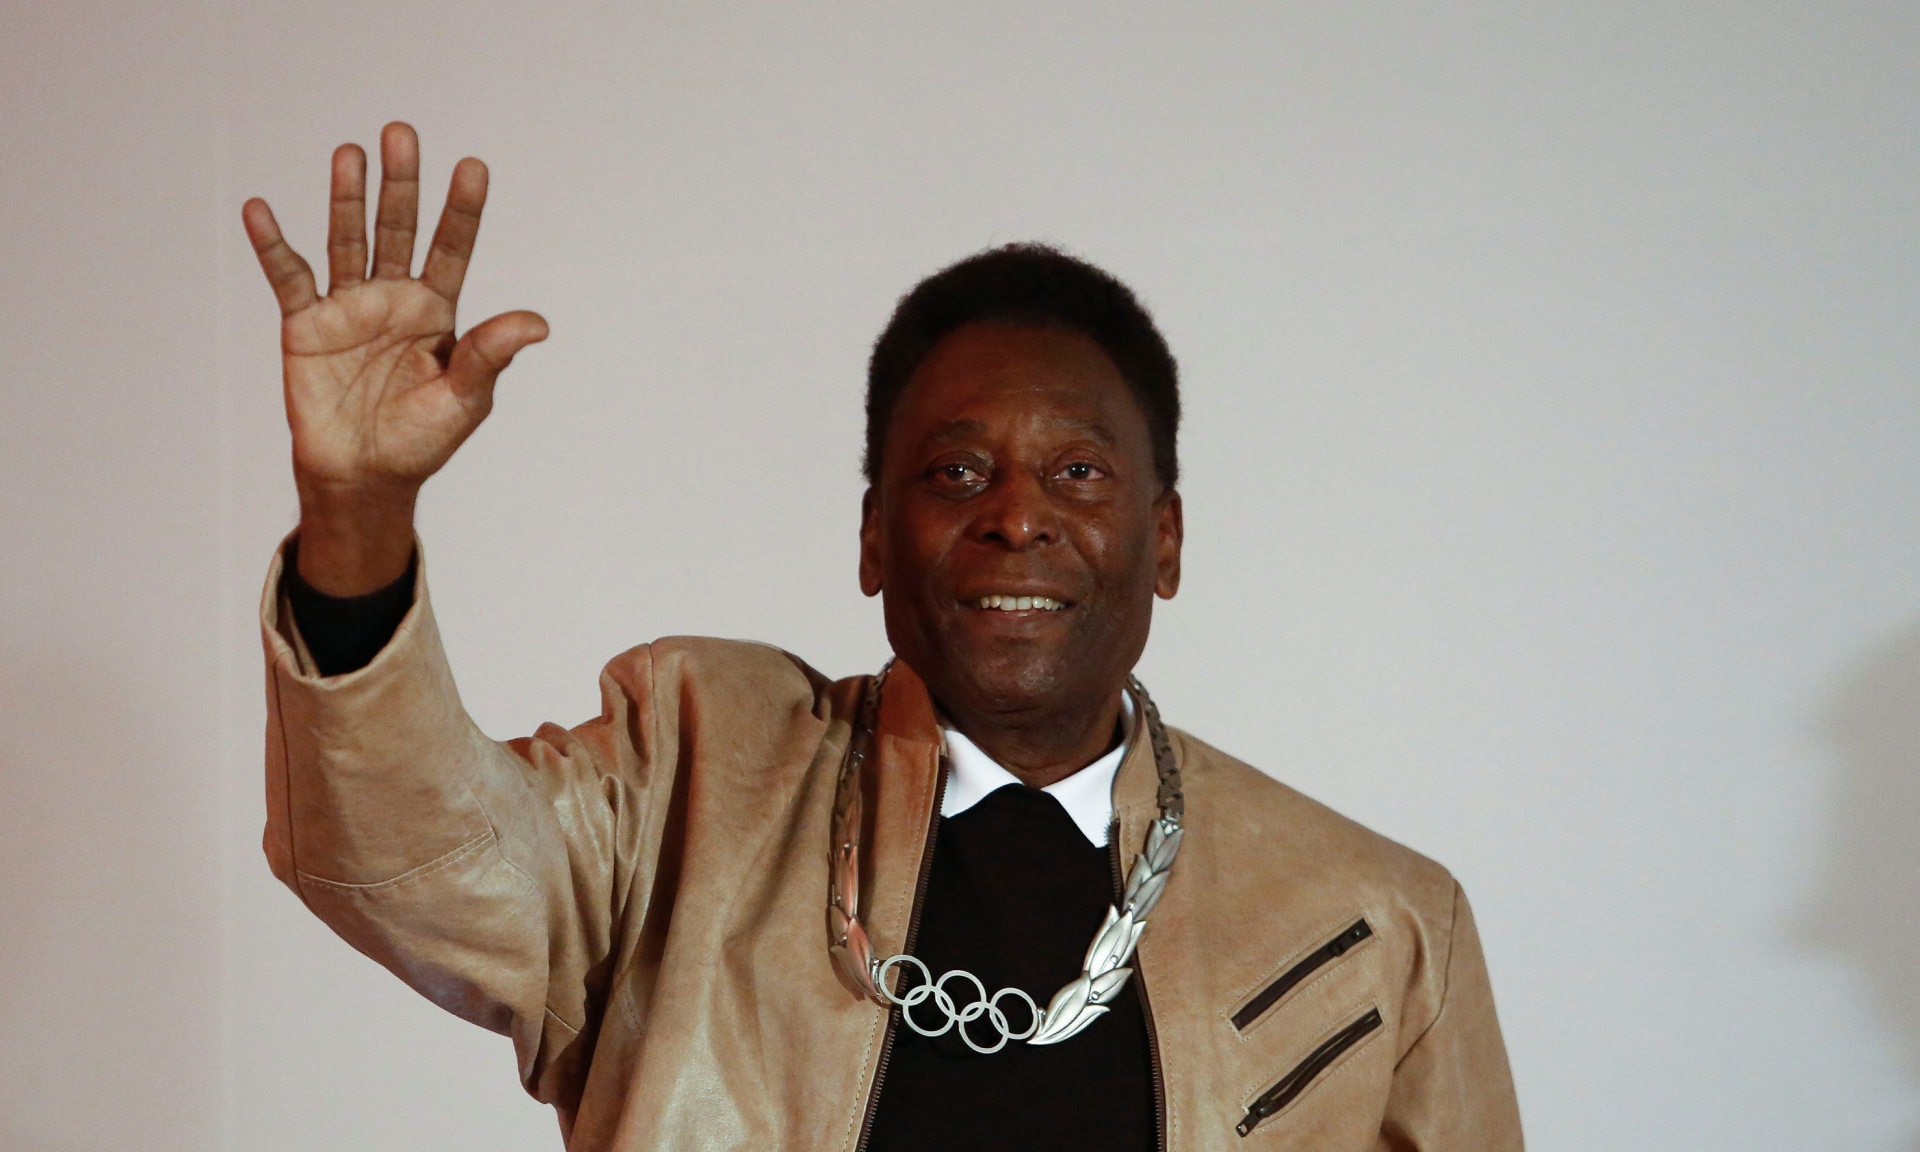 Brazilian retired footballer Edson Arantes do Nascimento, know as Pele, waves after being decorated with an Olympic Order Medal at the Pele Museum in Santos, Sao Paulo, Brazil, on June, 16, 2016.   / AFP PHOTO / Miguel Schincariolpele OLY-2016-RIO-PELE